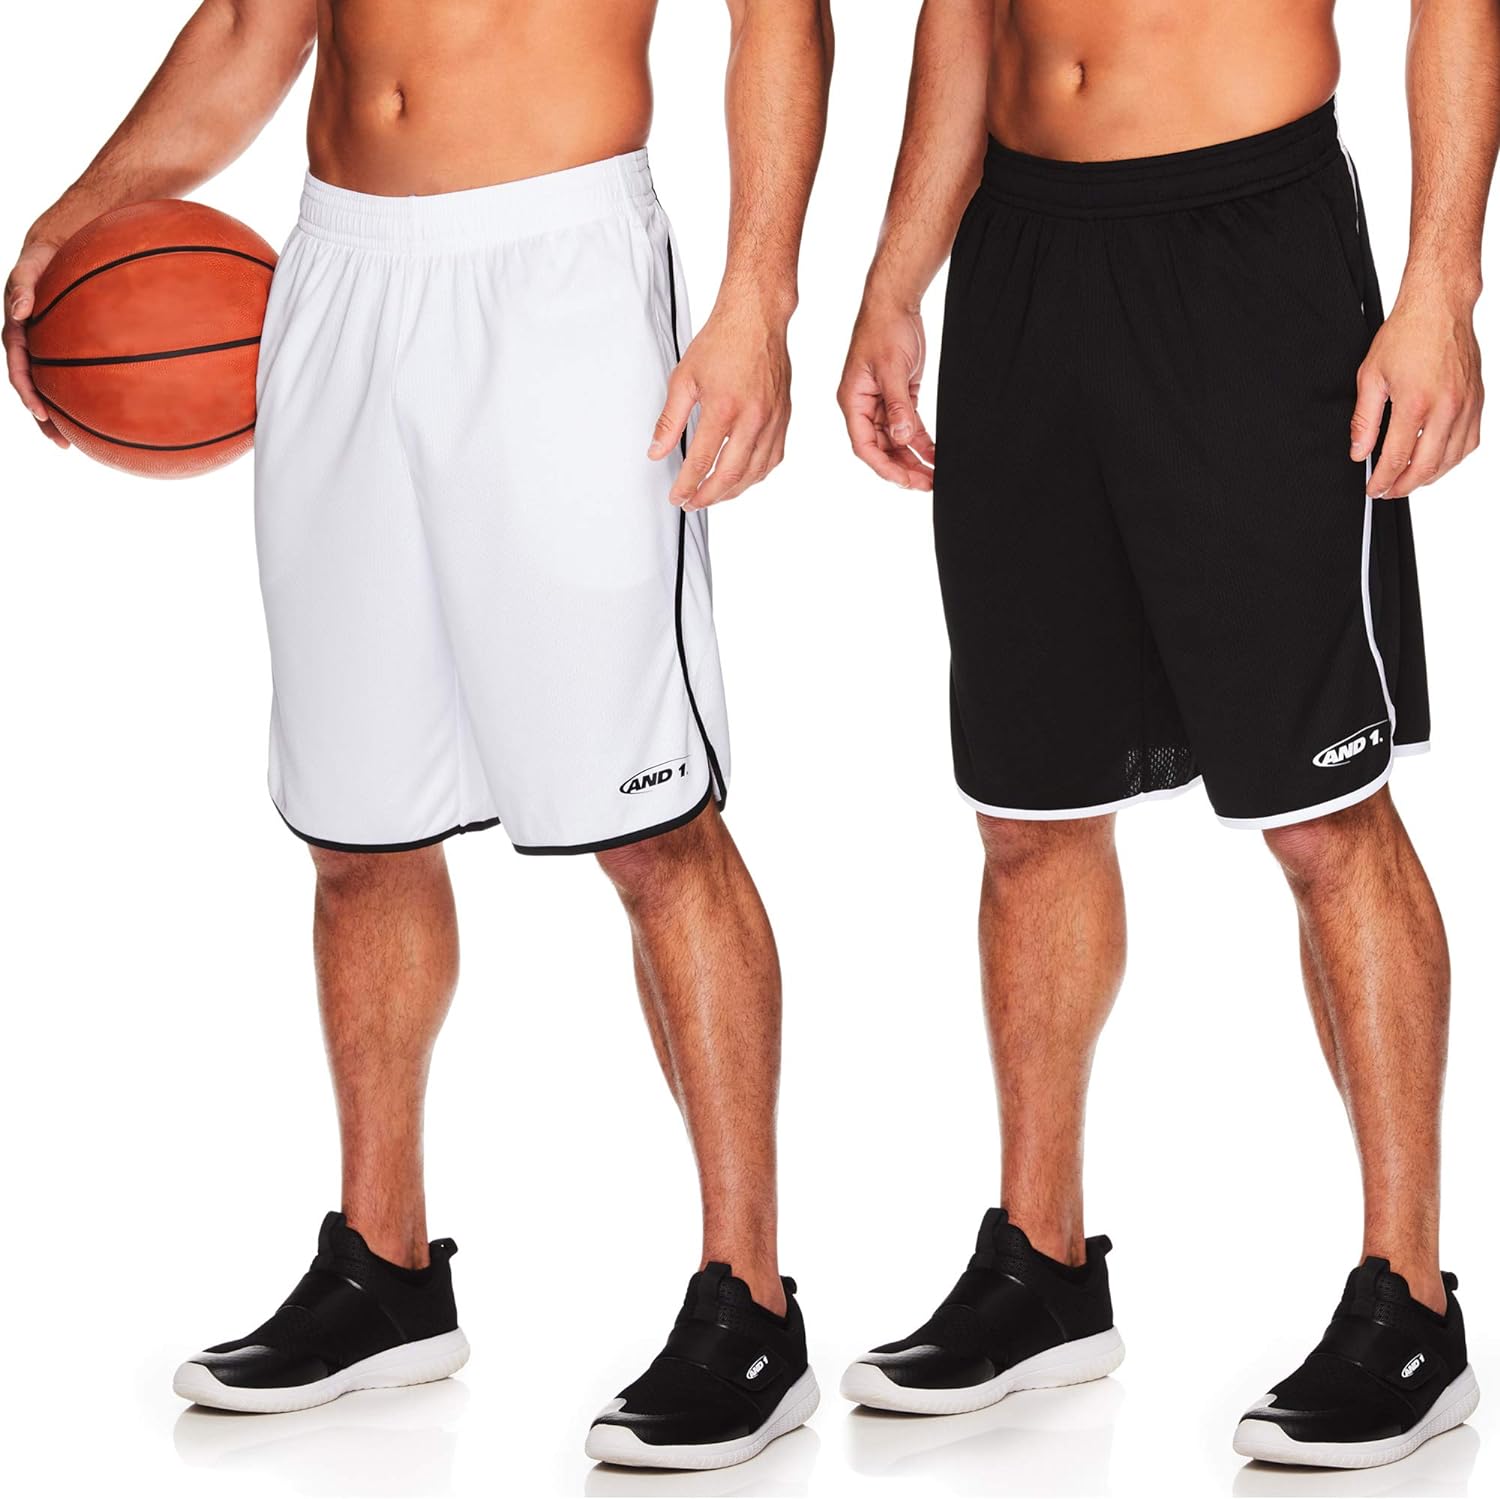 Need Bigger-Sized Basketball Shorts. Try These Top And1 Shorts in 4XL